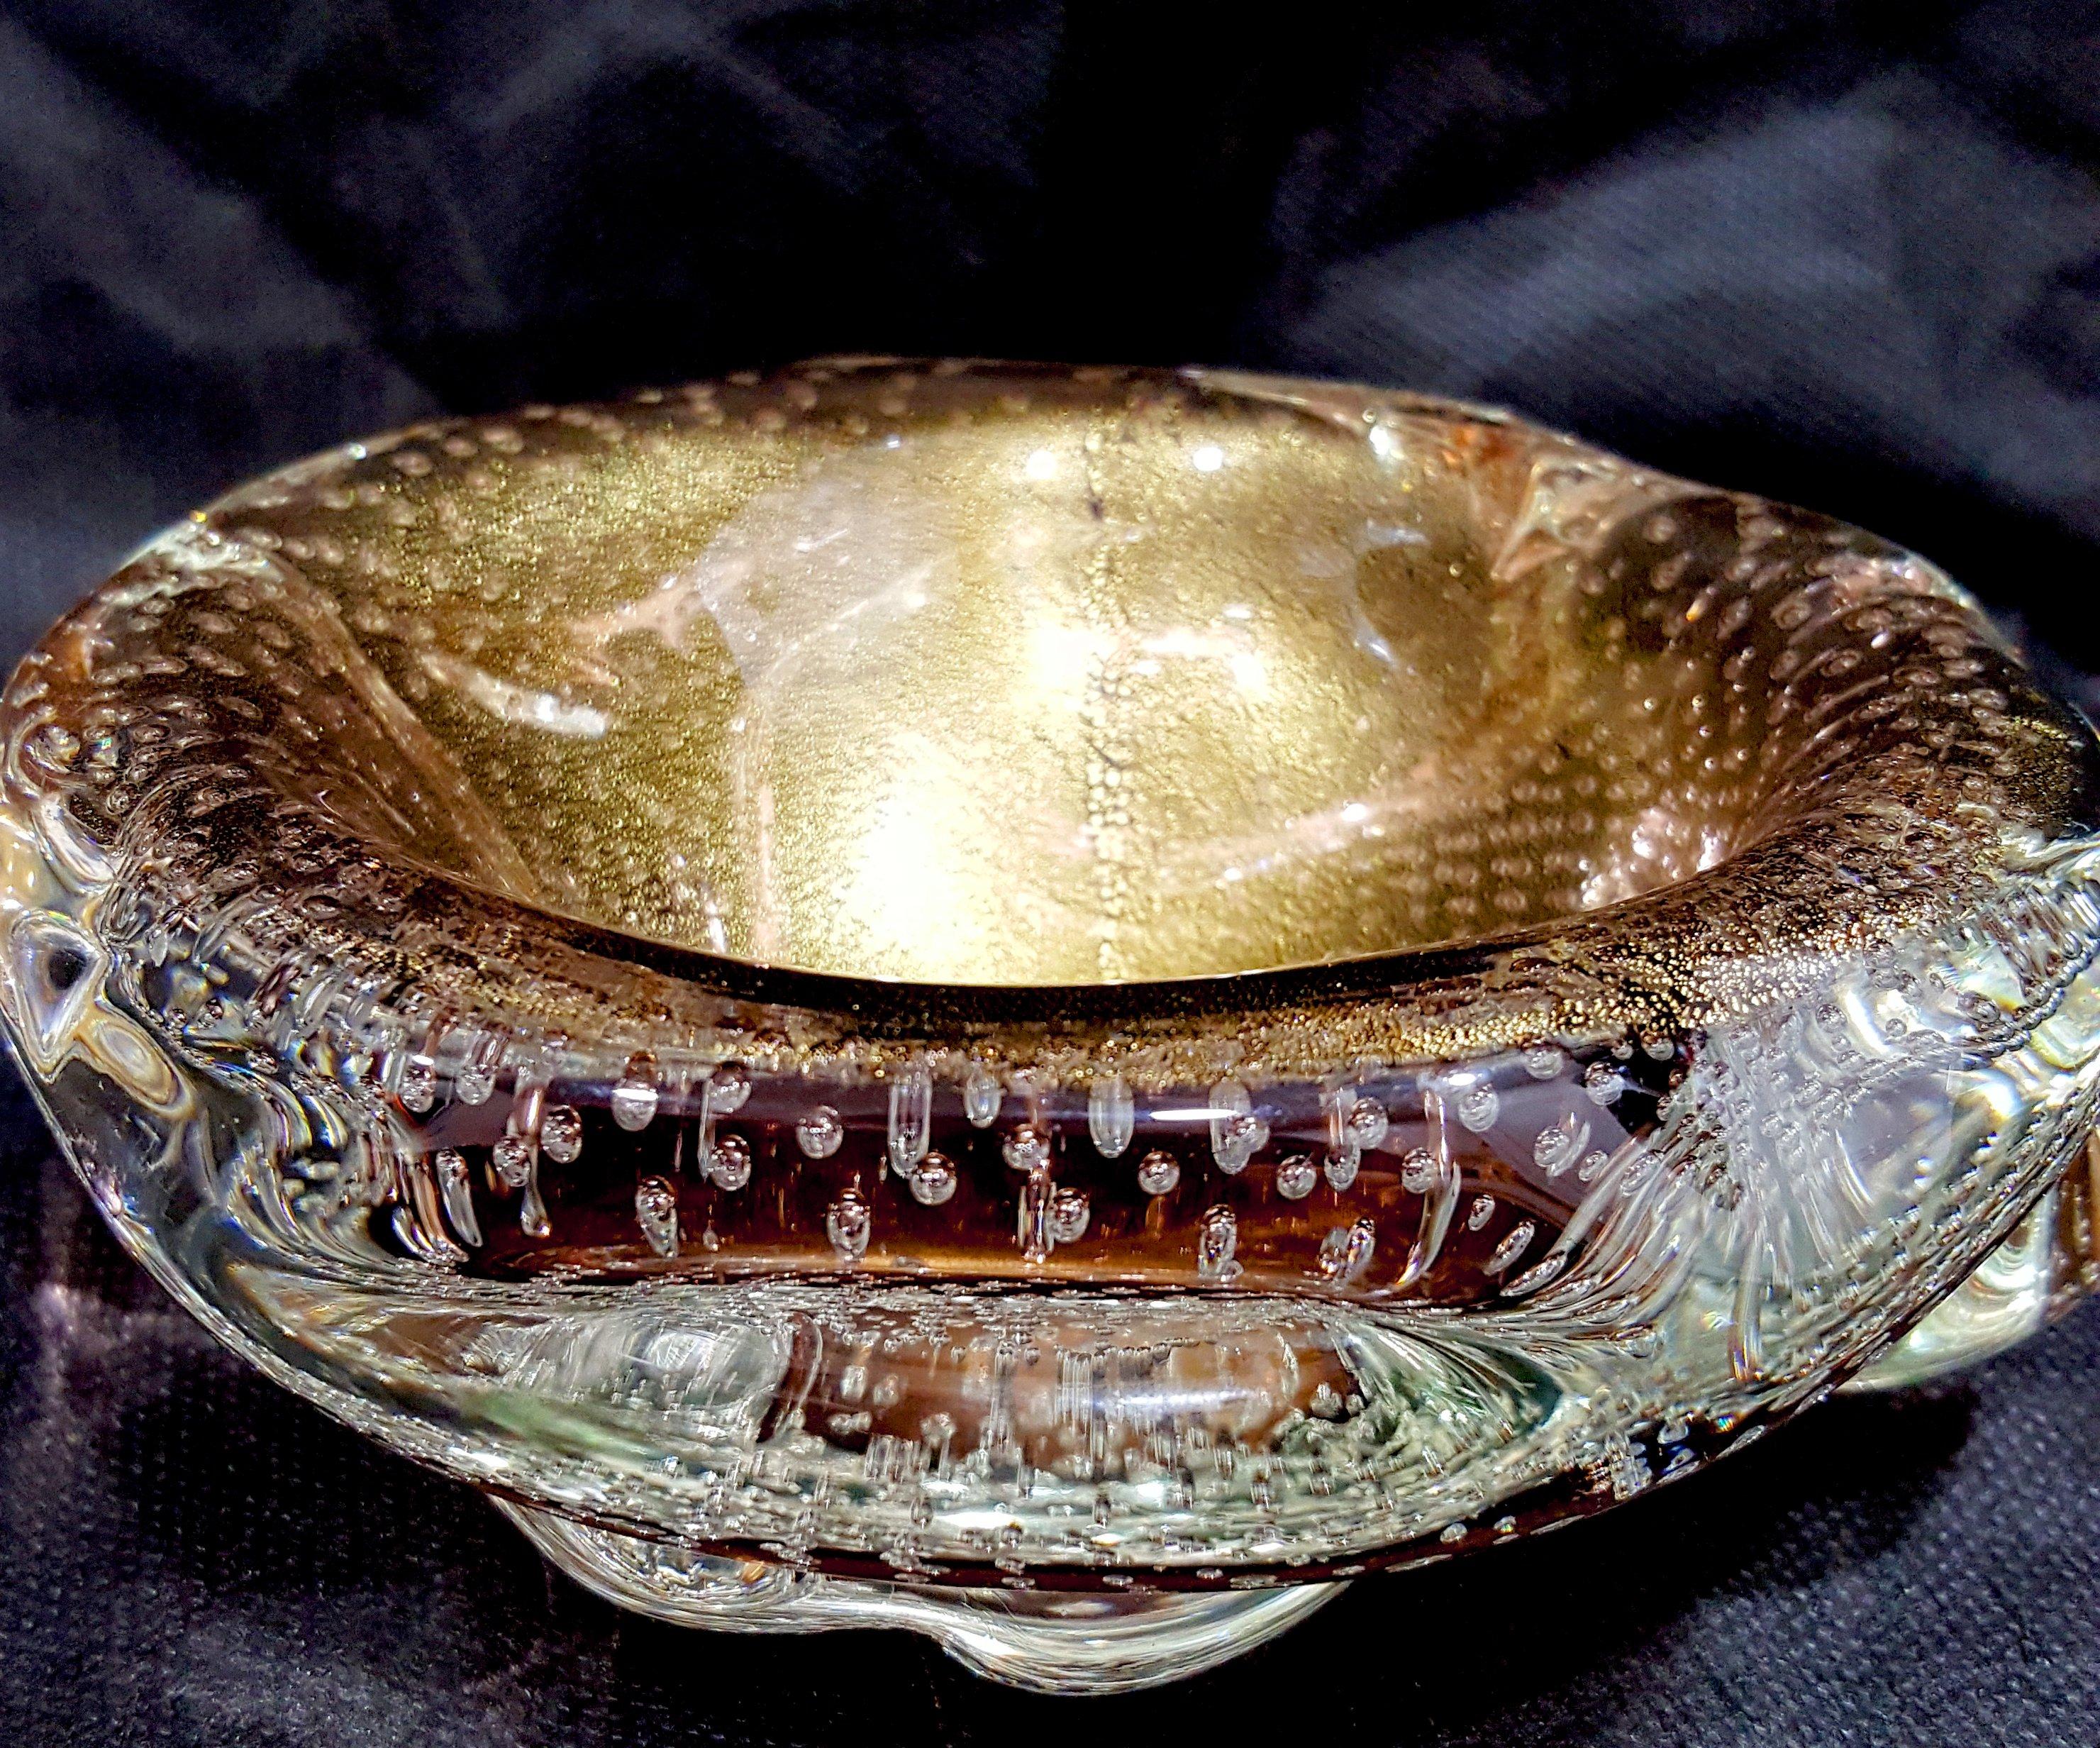 Murano Glass Archimede SEGUSO Gold Polveri & Bullicante Sculptural/A Bugne Bowl. Excellent vintage condition. We found no chips or cracks. 
Color changes appearance depending on the angle--see variety in photos and the video.

Measurements are